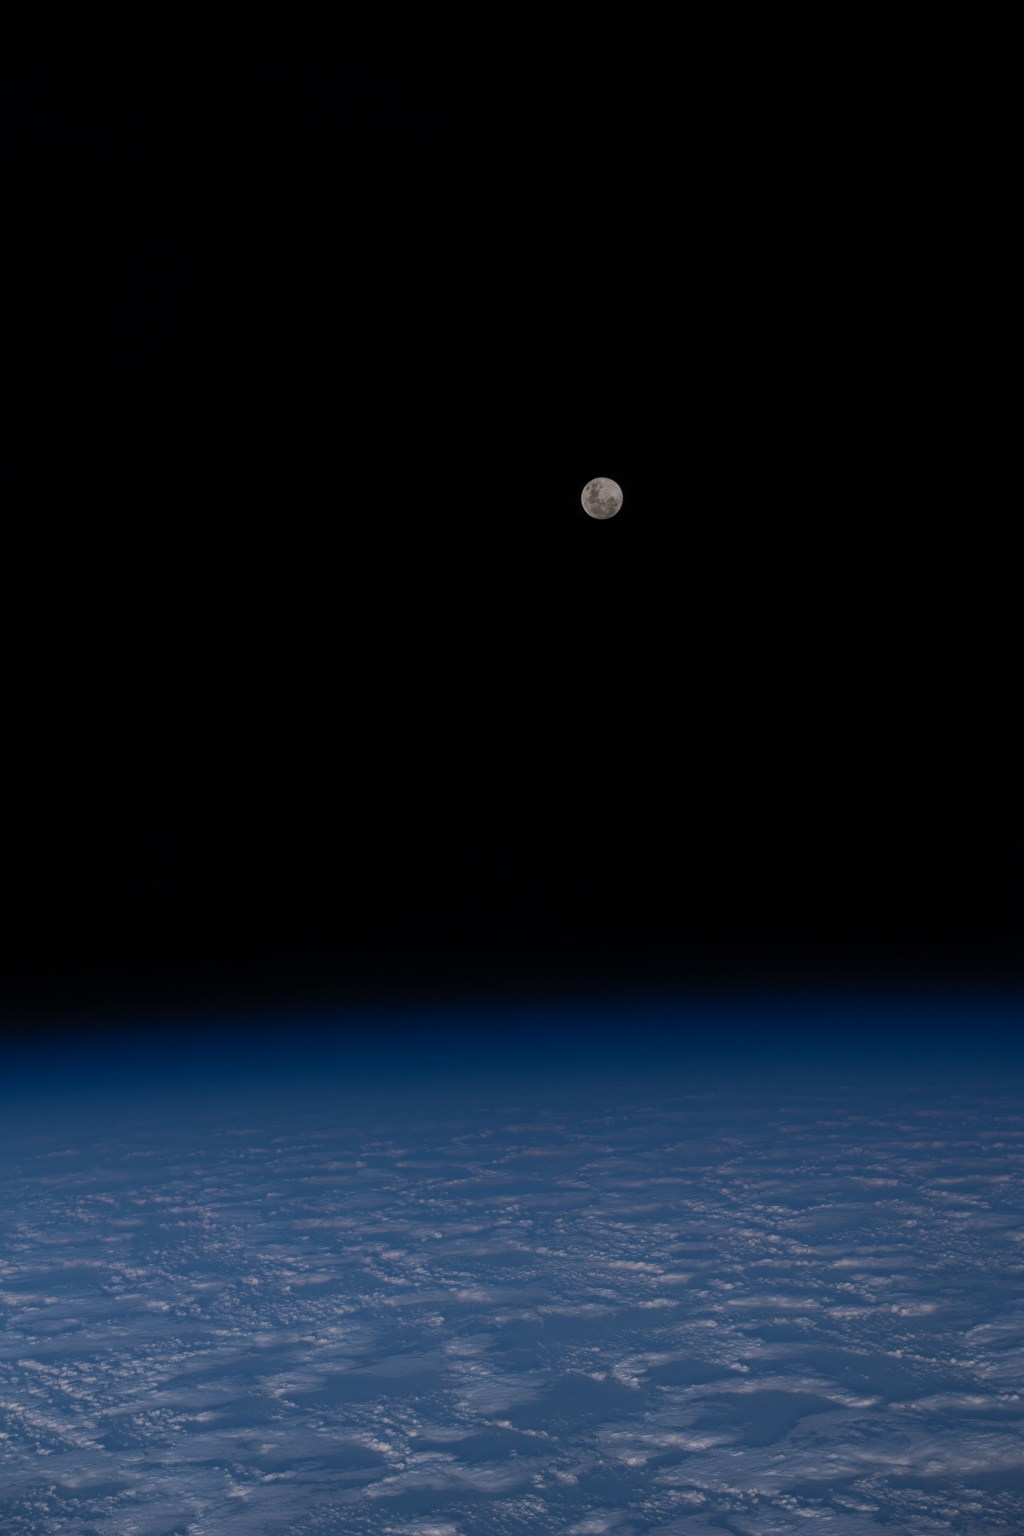 The Full Moon is pictured from the International Space Station as it orbited 271 miles above a cloudy south Indian Ocean half-way between Australia and Antarctica.